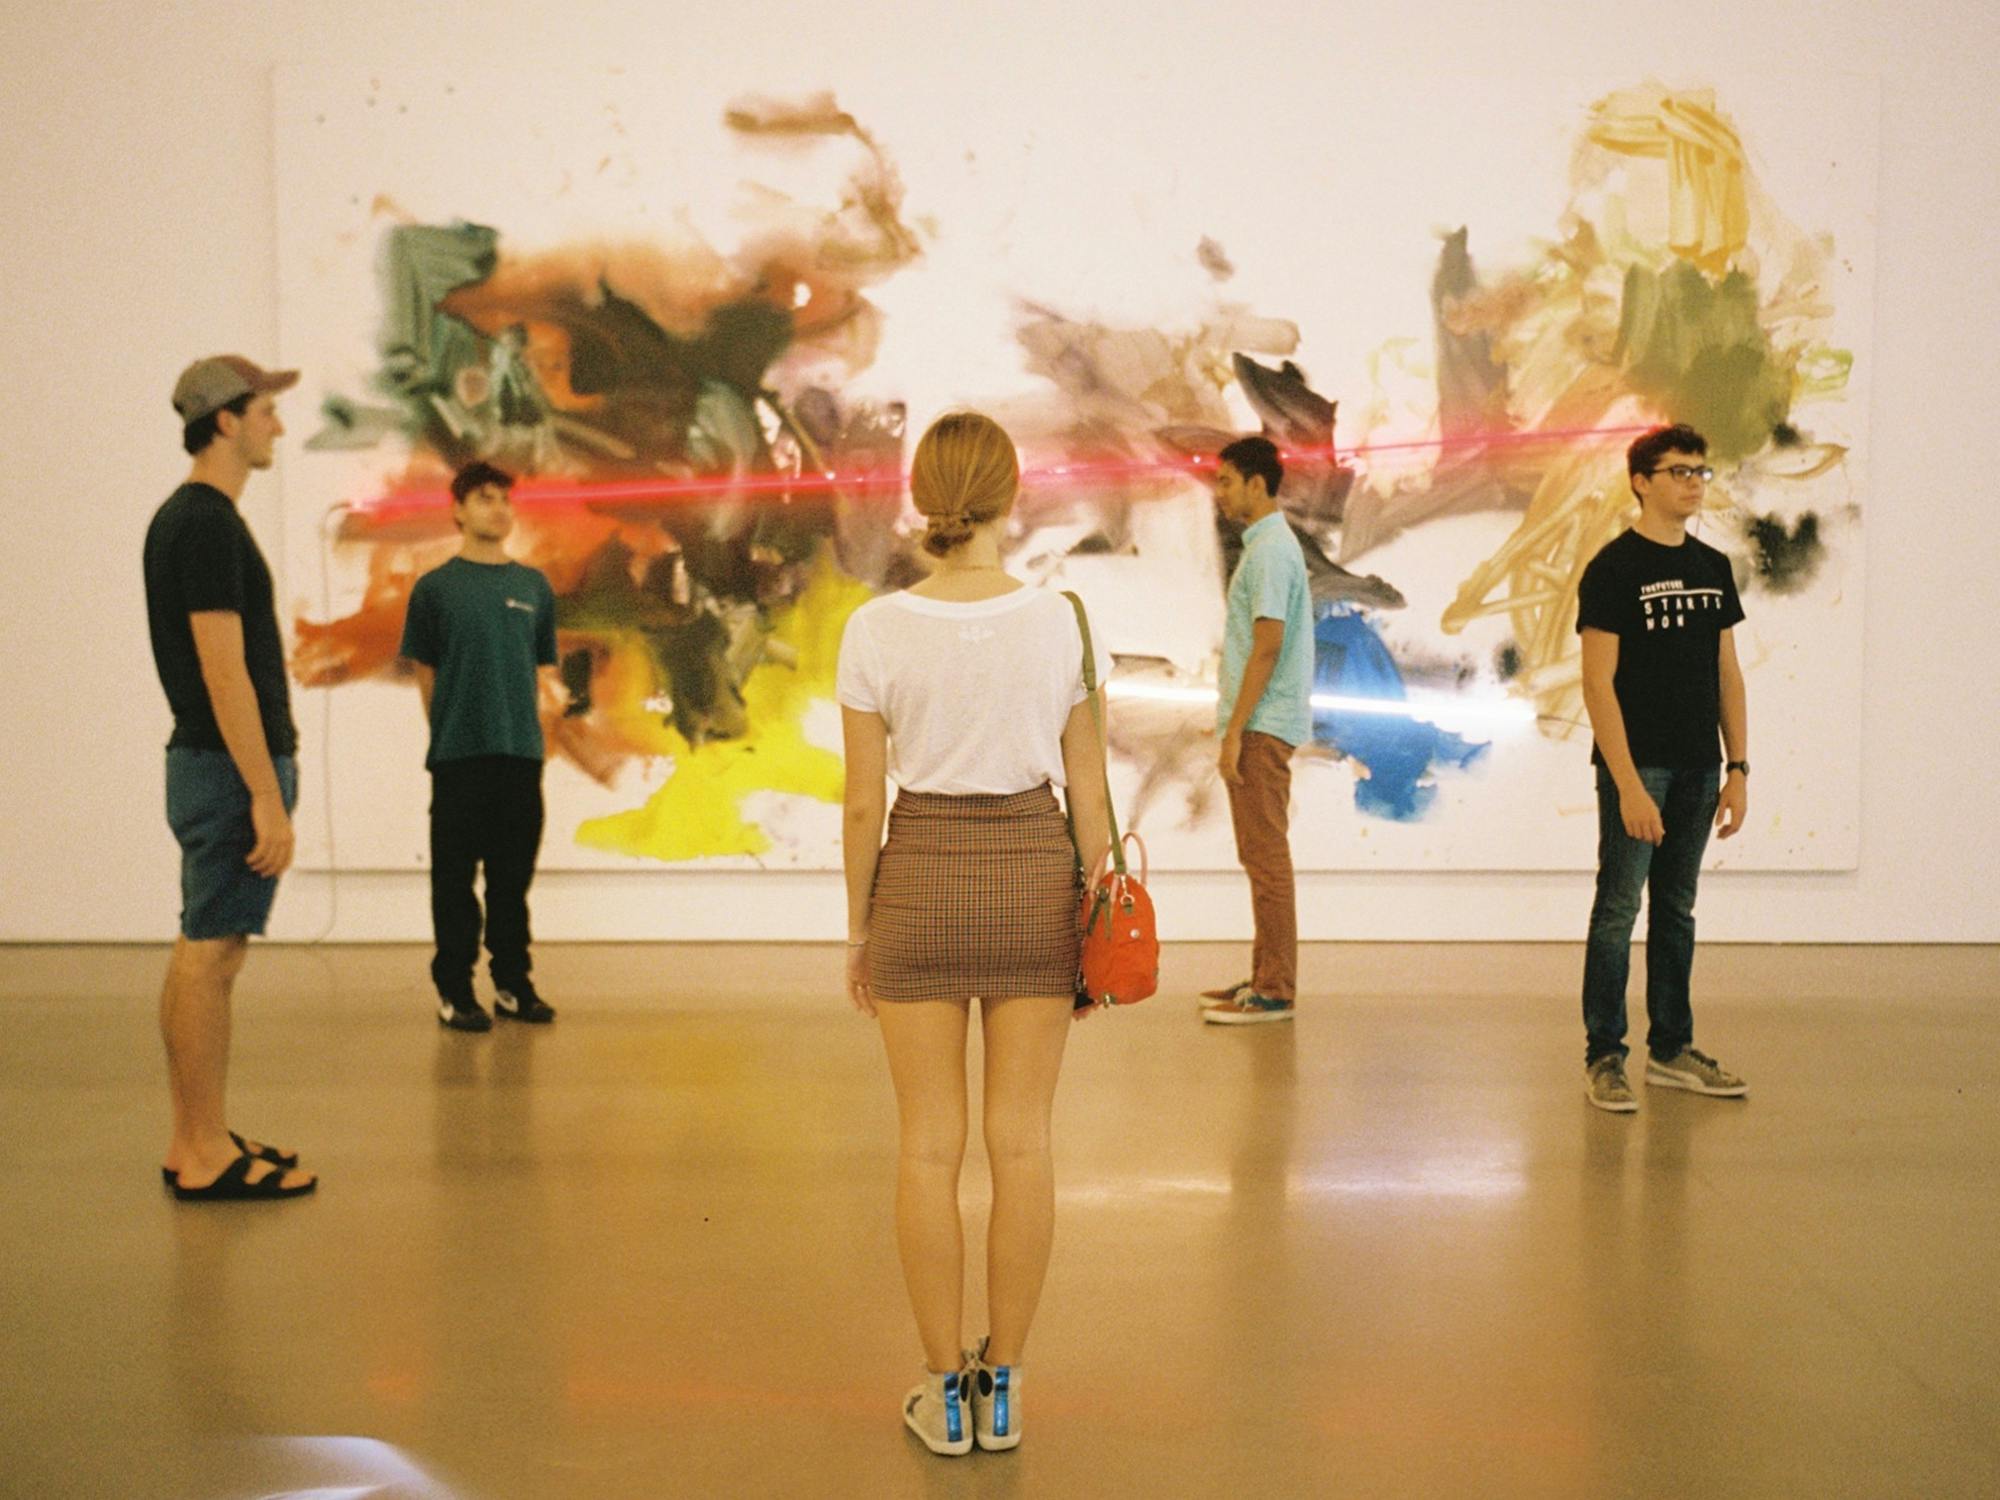 A group of students stand still in a gallery standing stock still. Behind them is an abstract painting